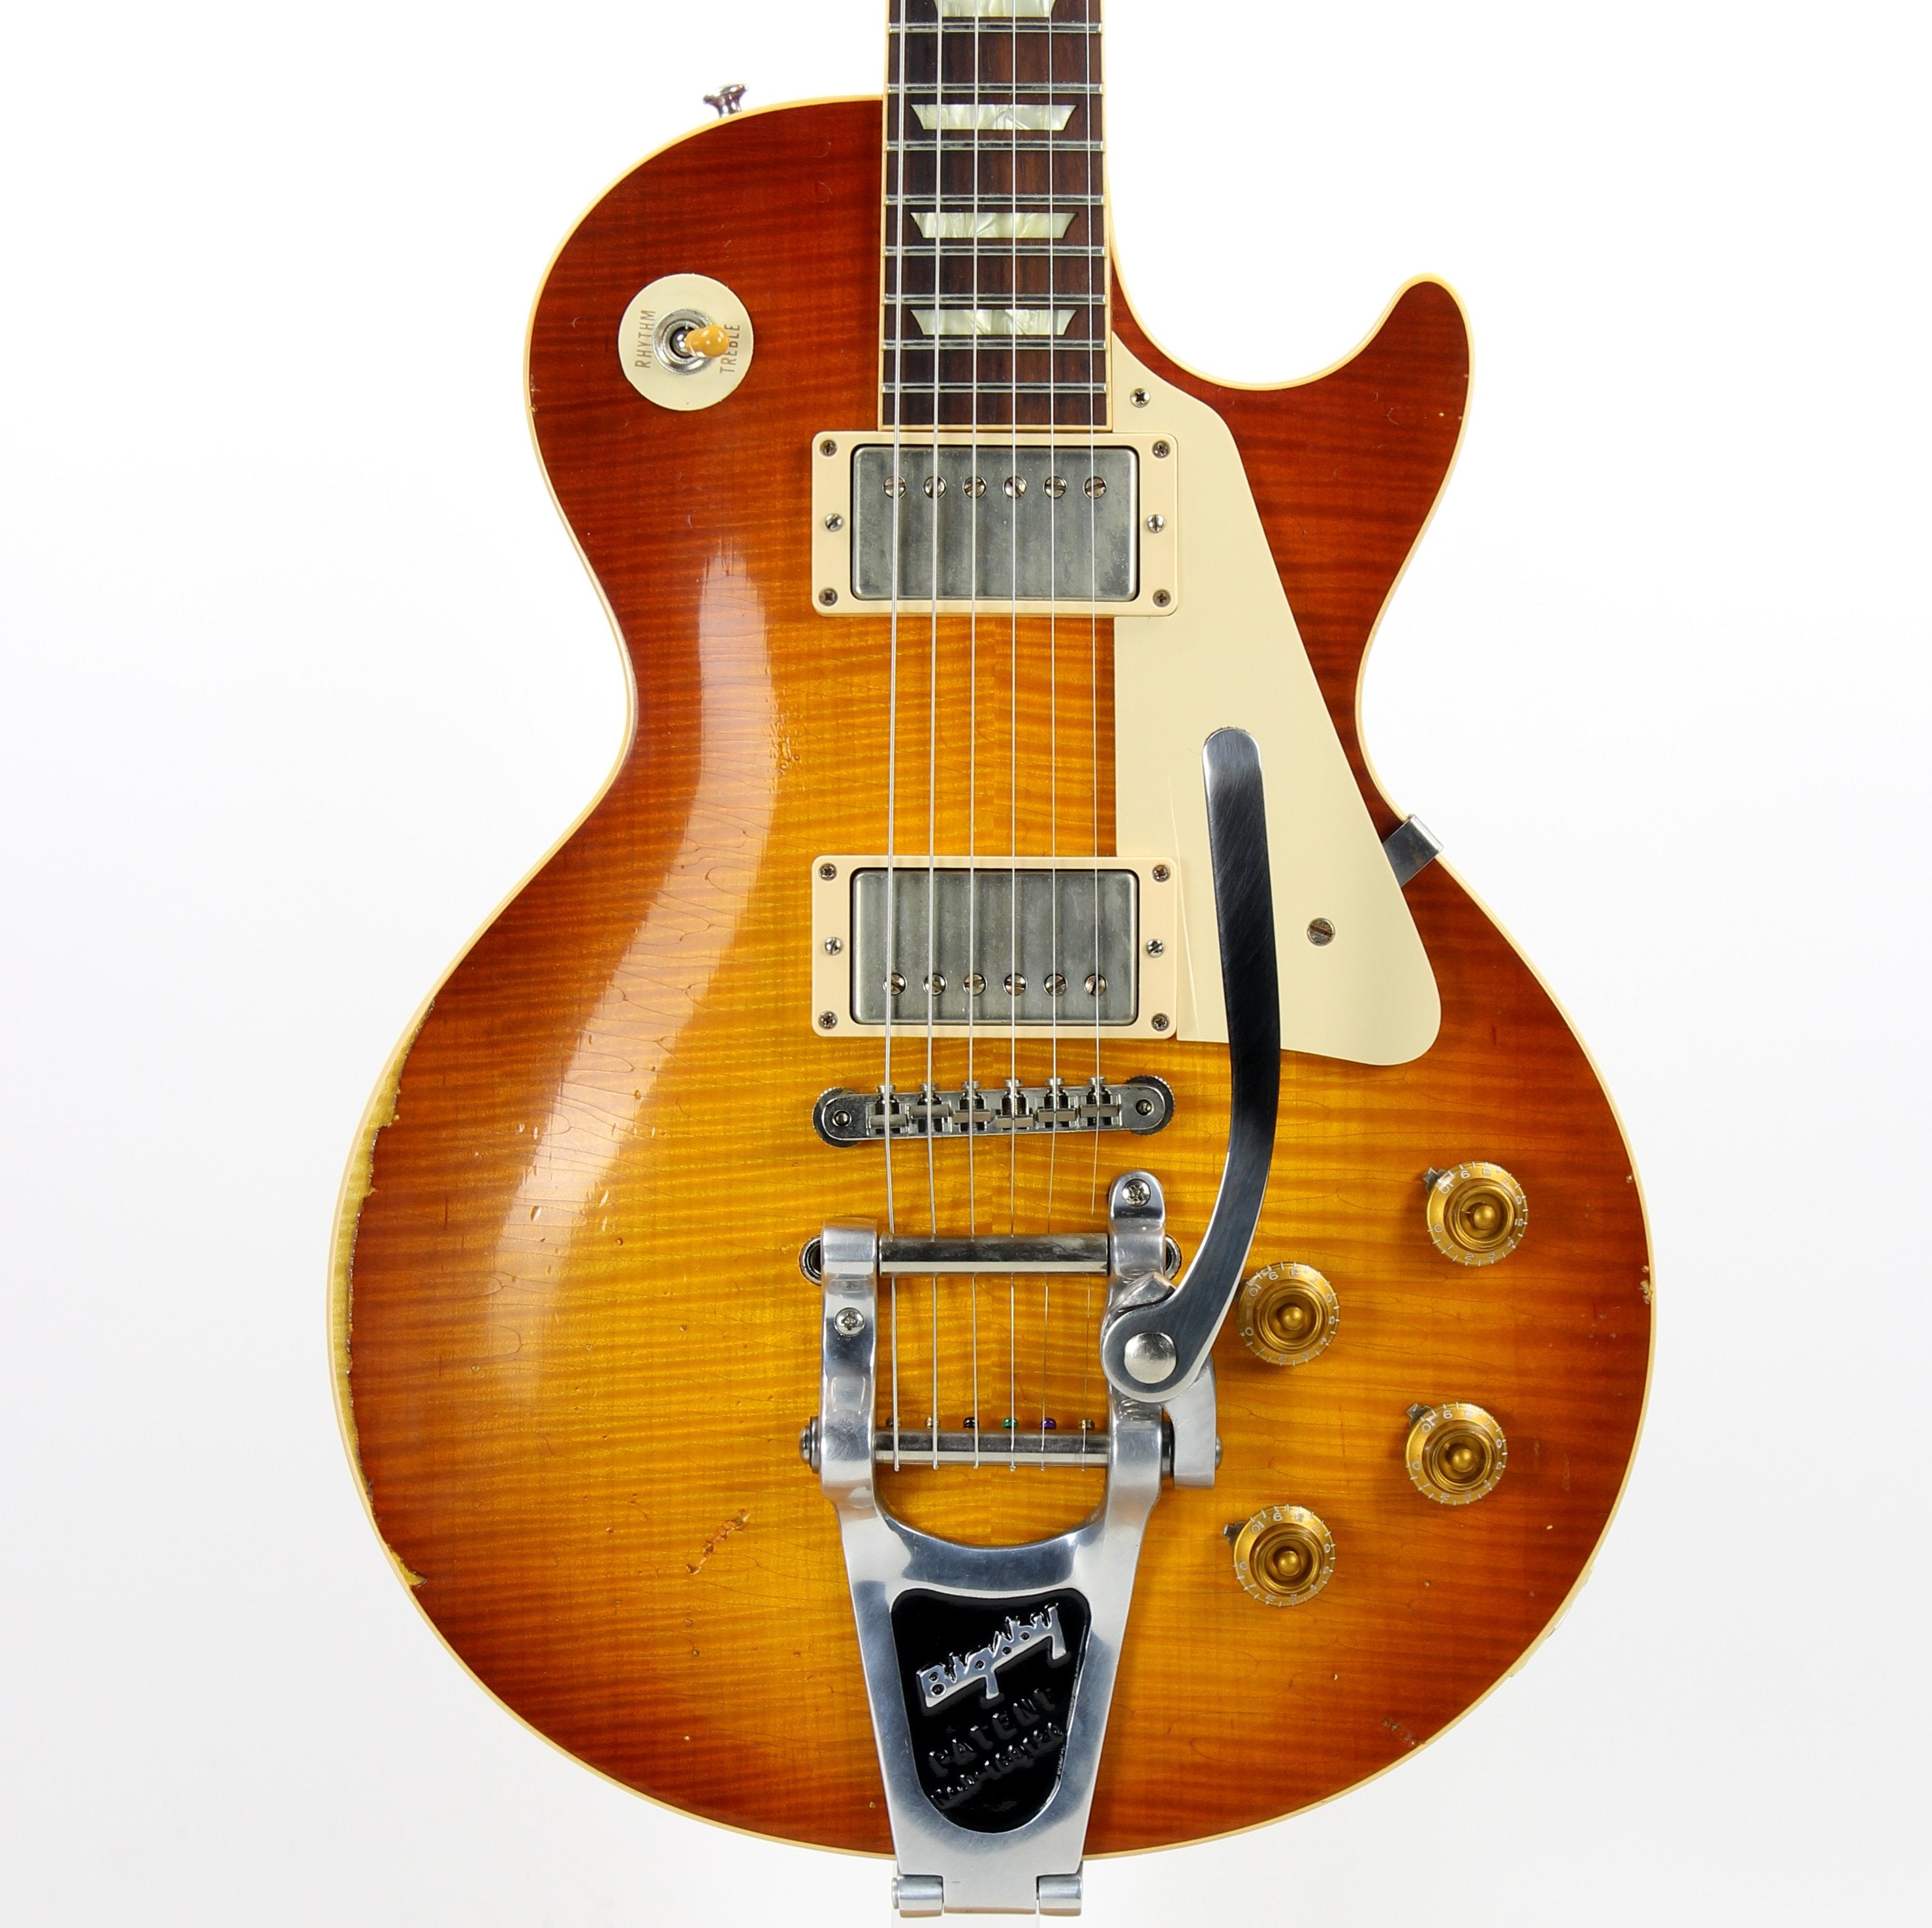 *SOLD*  1959 Gibson Custom Shop '59 Reissue Les Paul Tom Murphy ULTRA HEAVY AGED R9 Bigsby BOTB 1 of 30!